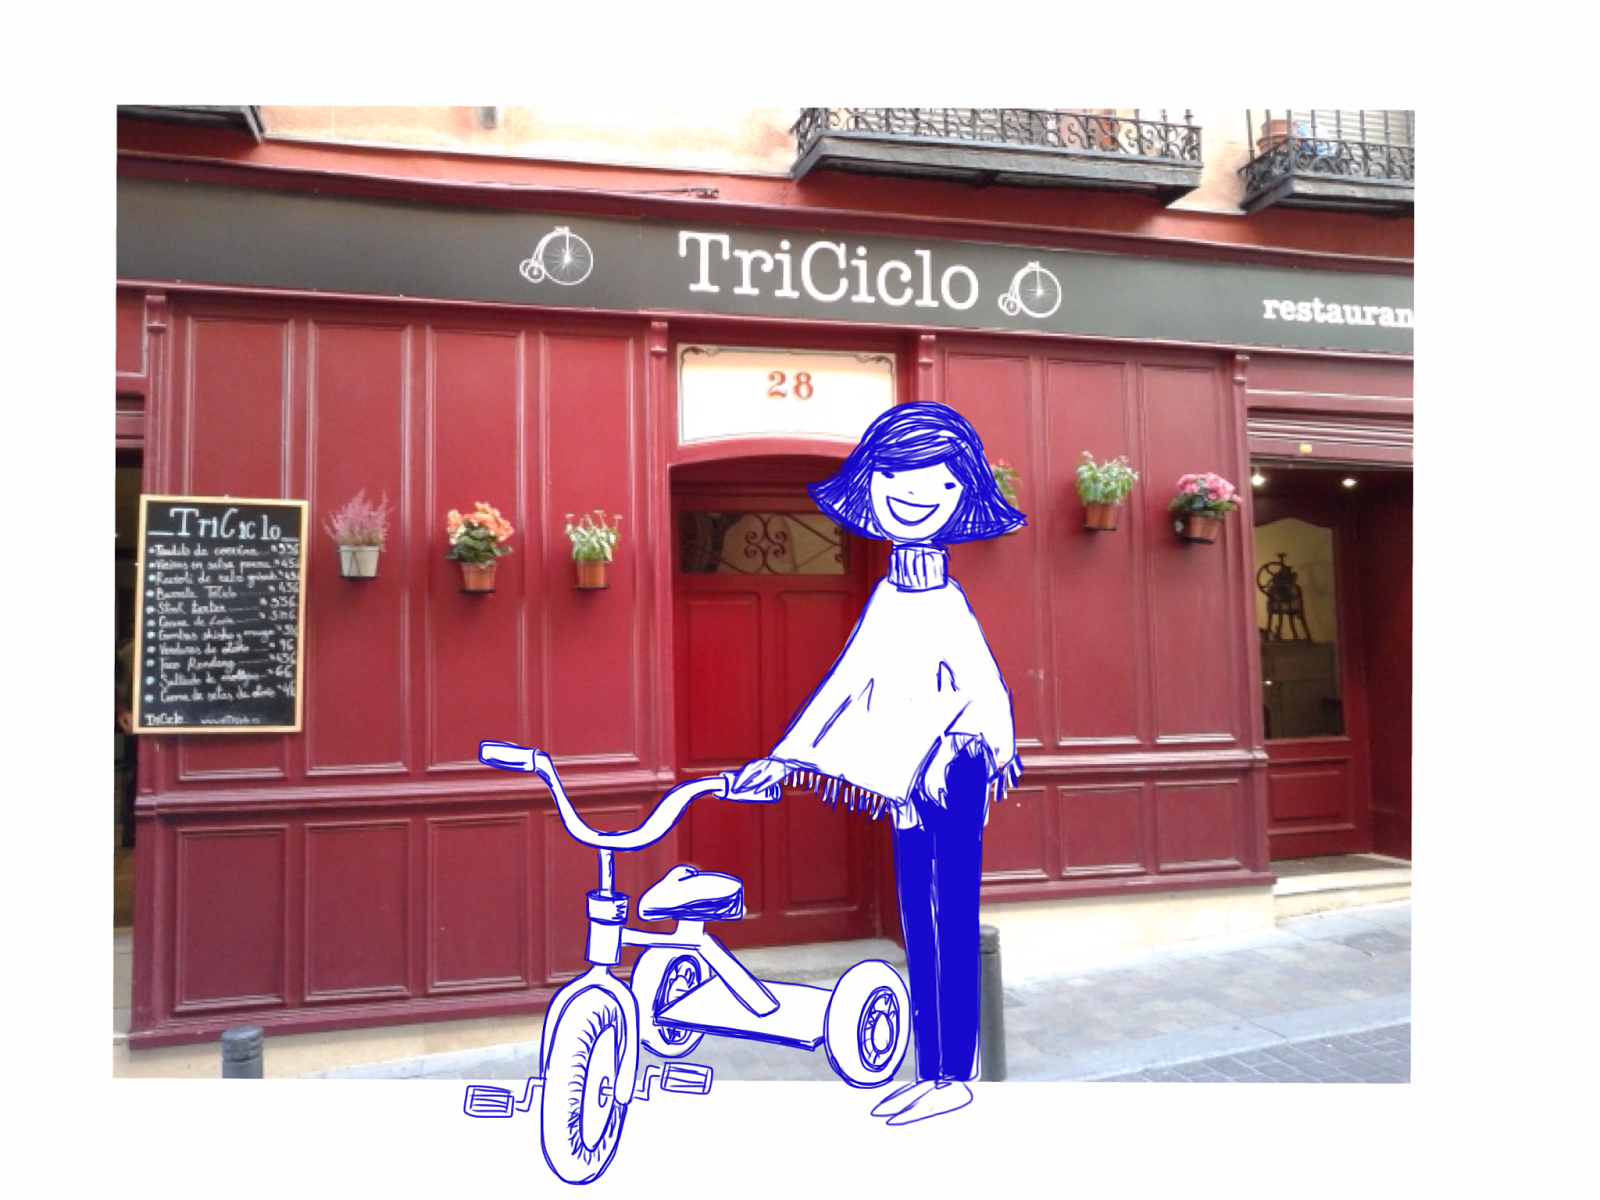 Restaurant TriCiclo drawing My Little Madrid